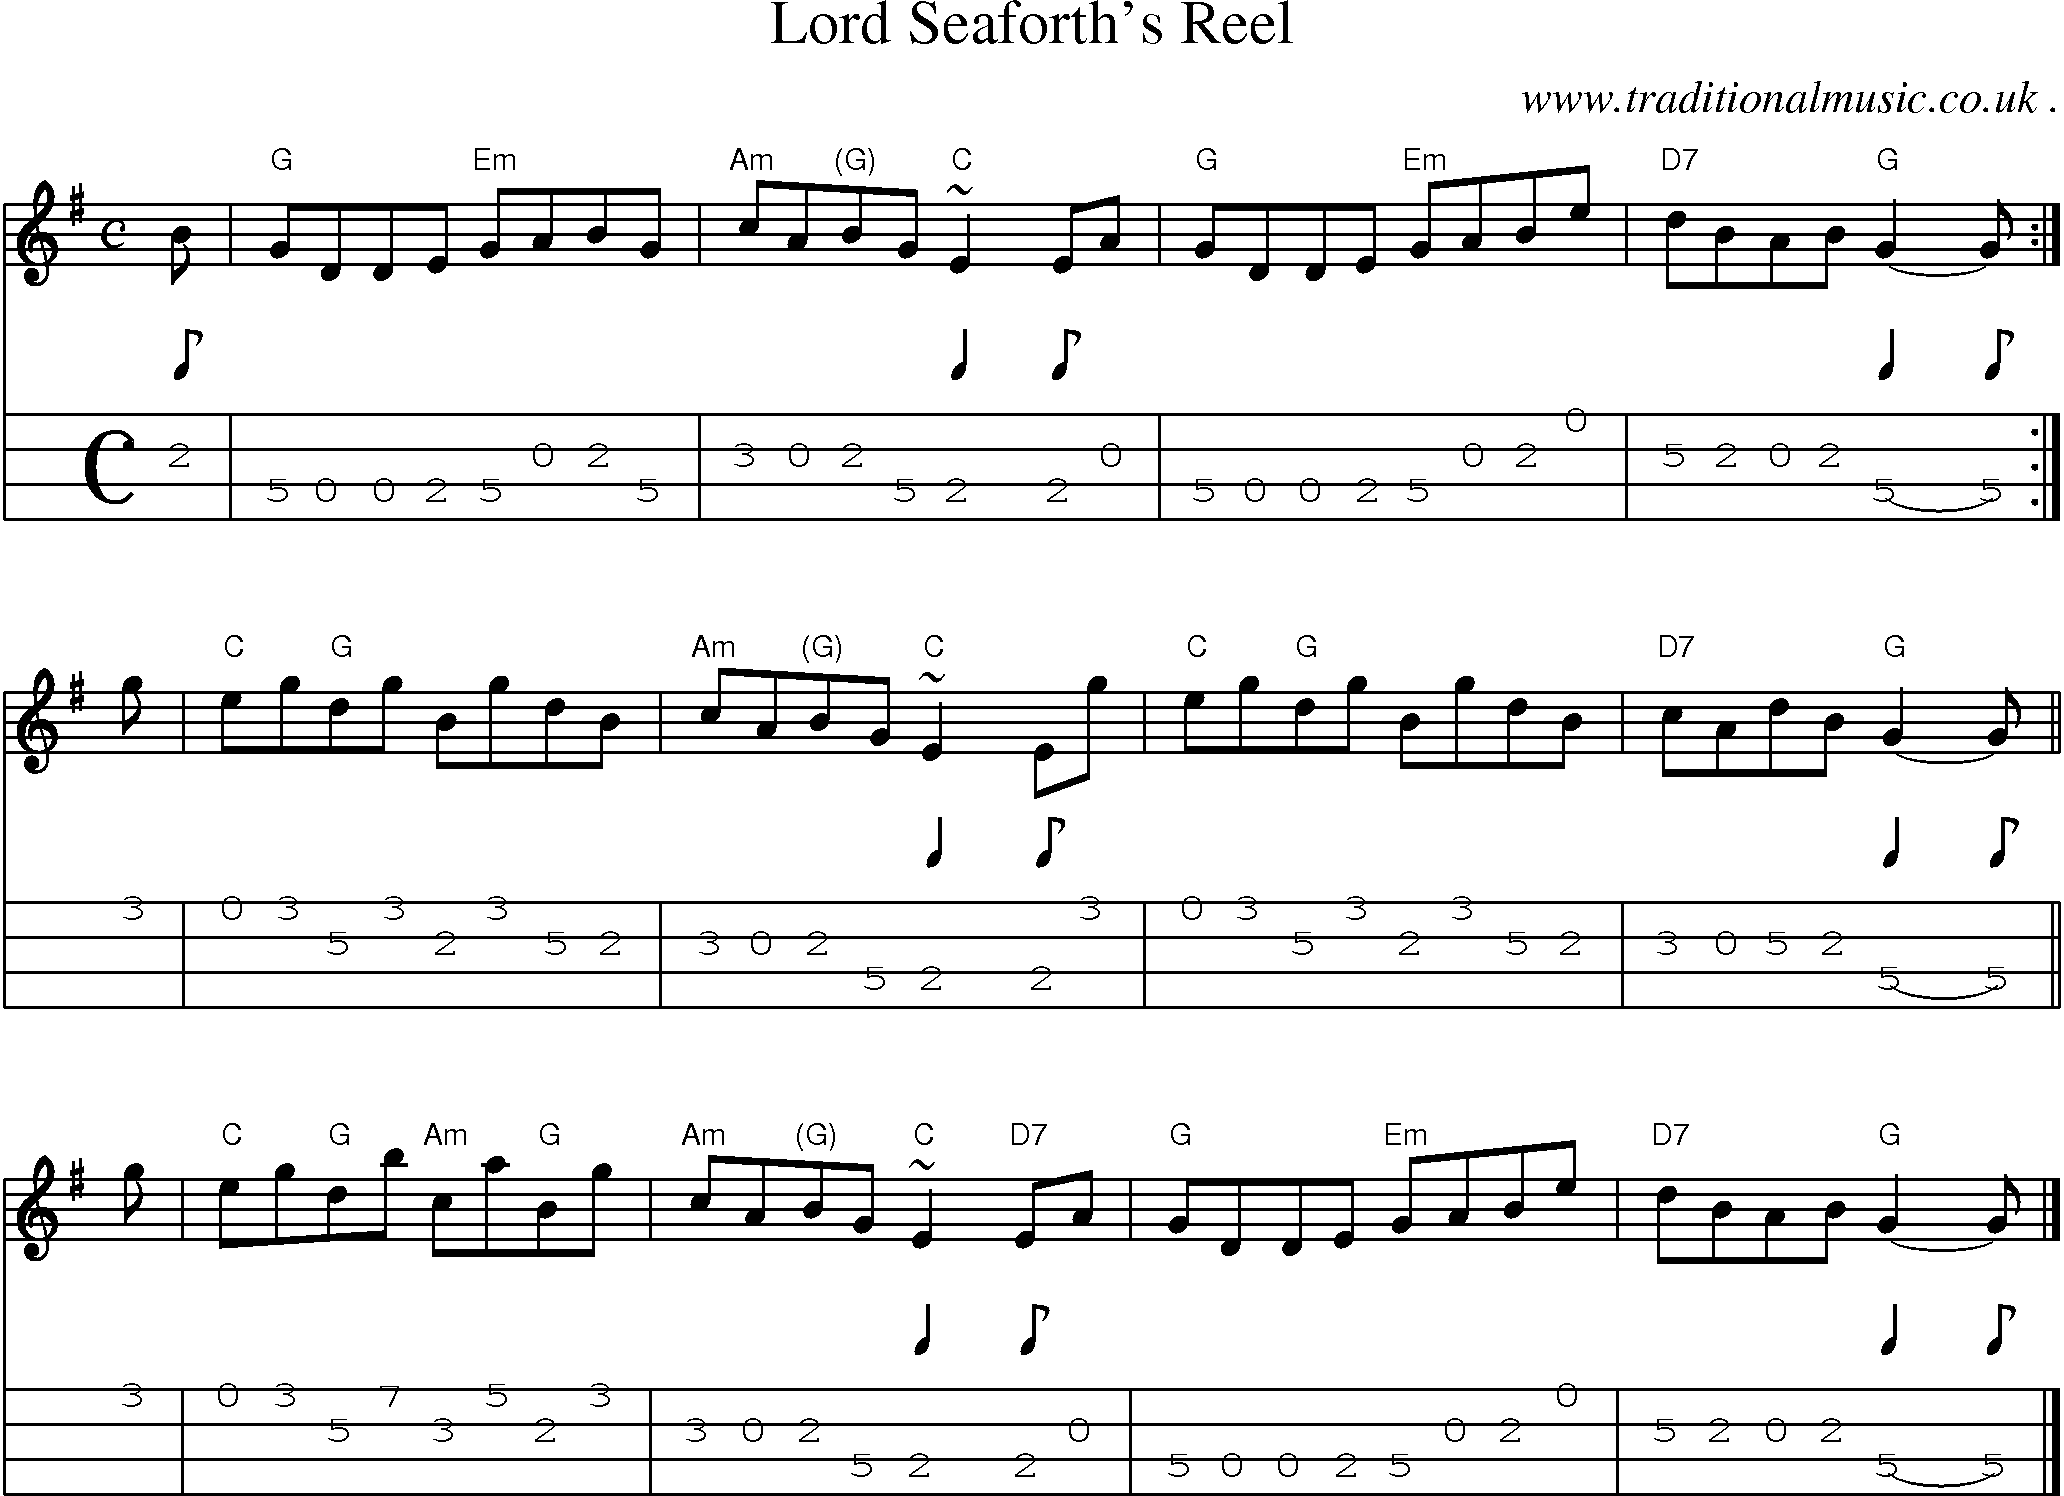 Sheet-music  score, Chords and Mandolin Tabs for Lord Seaforths Reel